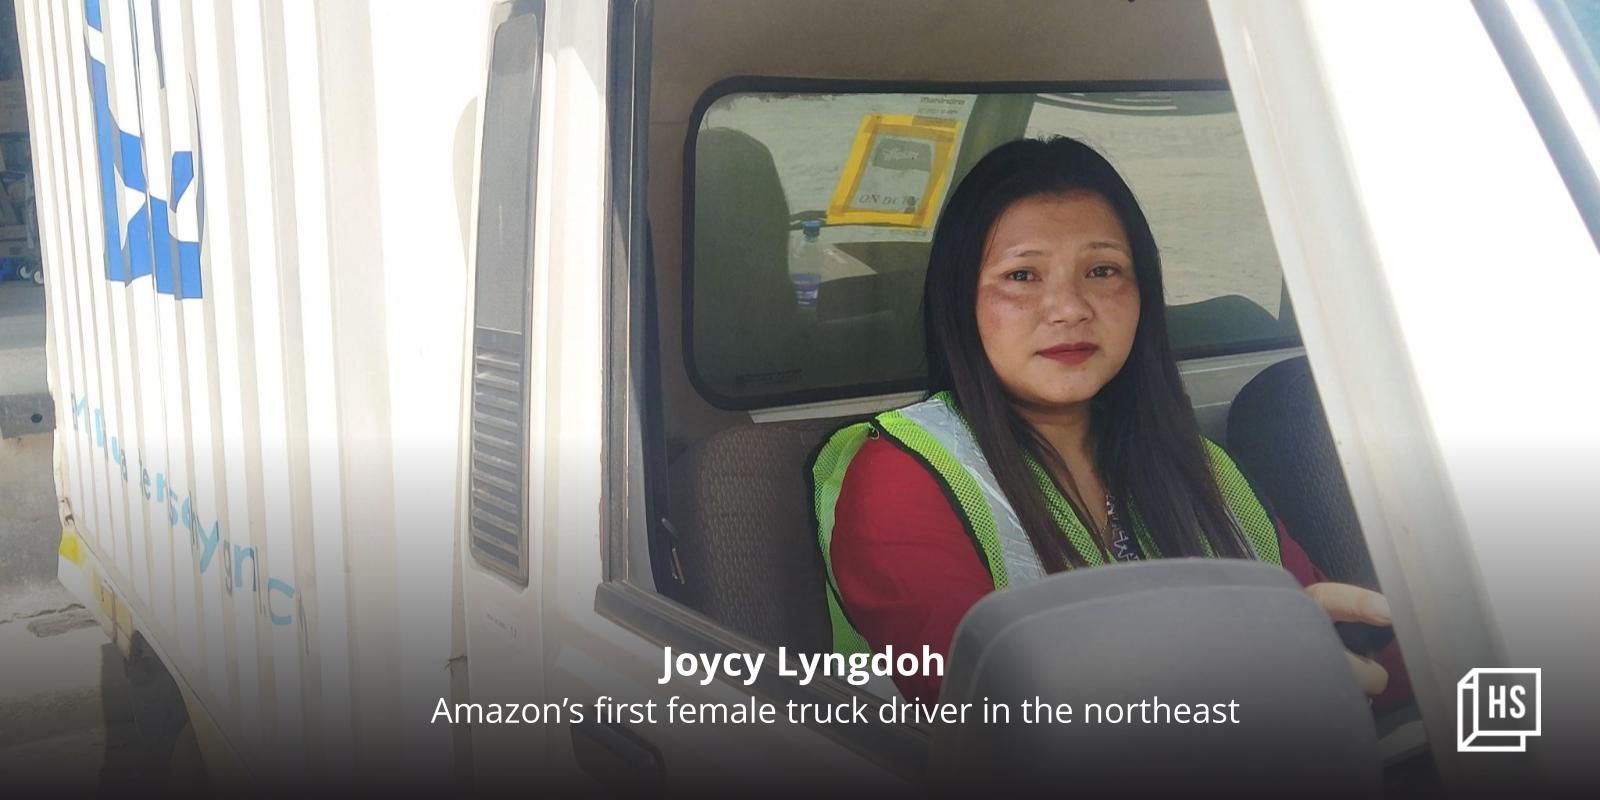 This woman from Shillong is breaking stereotypes by being Amazon’s first female truck driver 